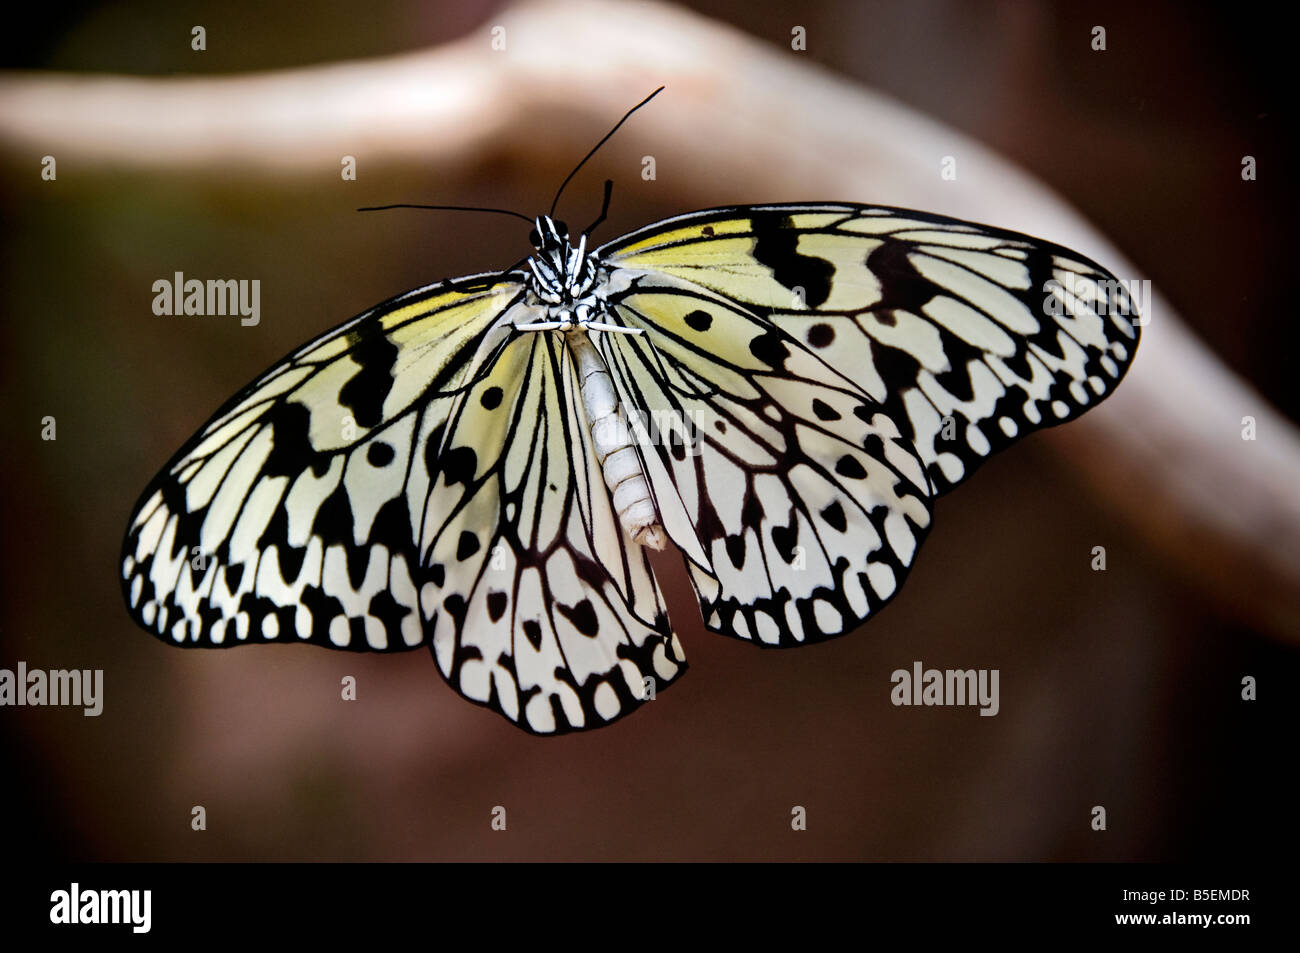 Butterfly white tree nymph Idea leuconoe, paper kite, rice paper tropical, with wings spread in natural habitat Stock Photo